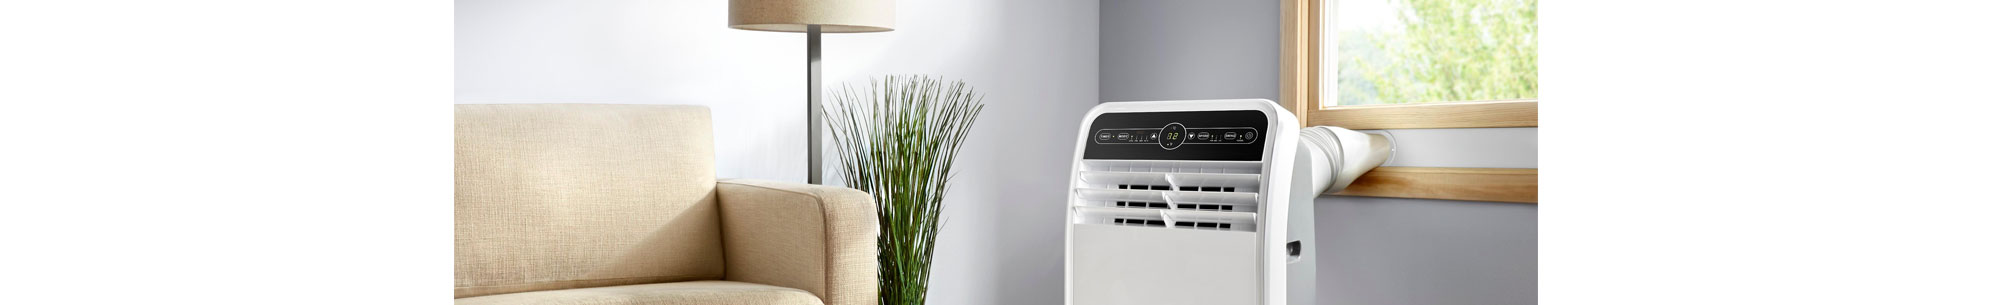 BTU Ratings for Portable Air Conditioners - Best Buy